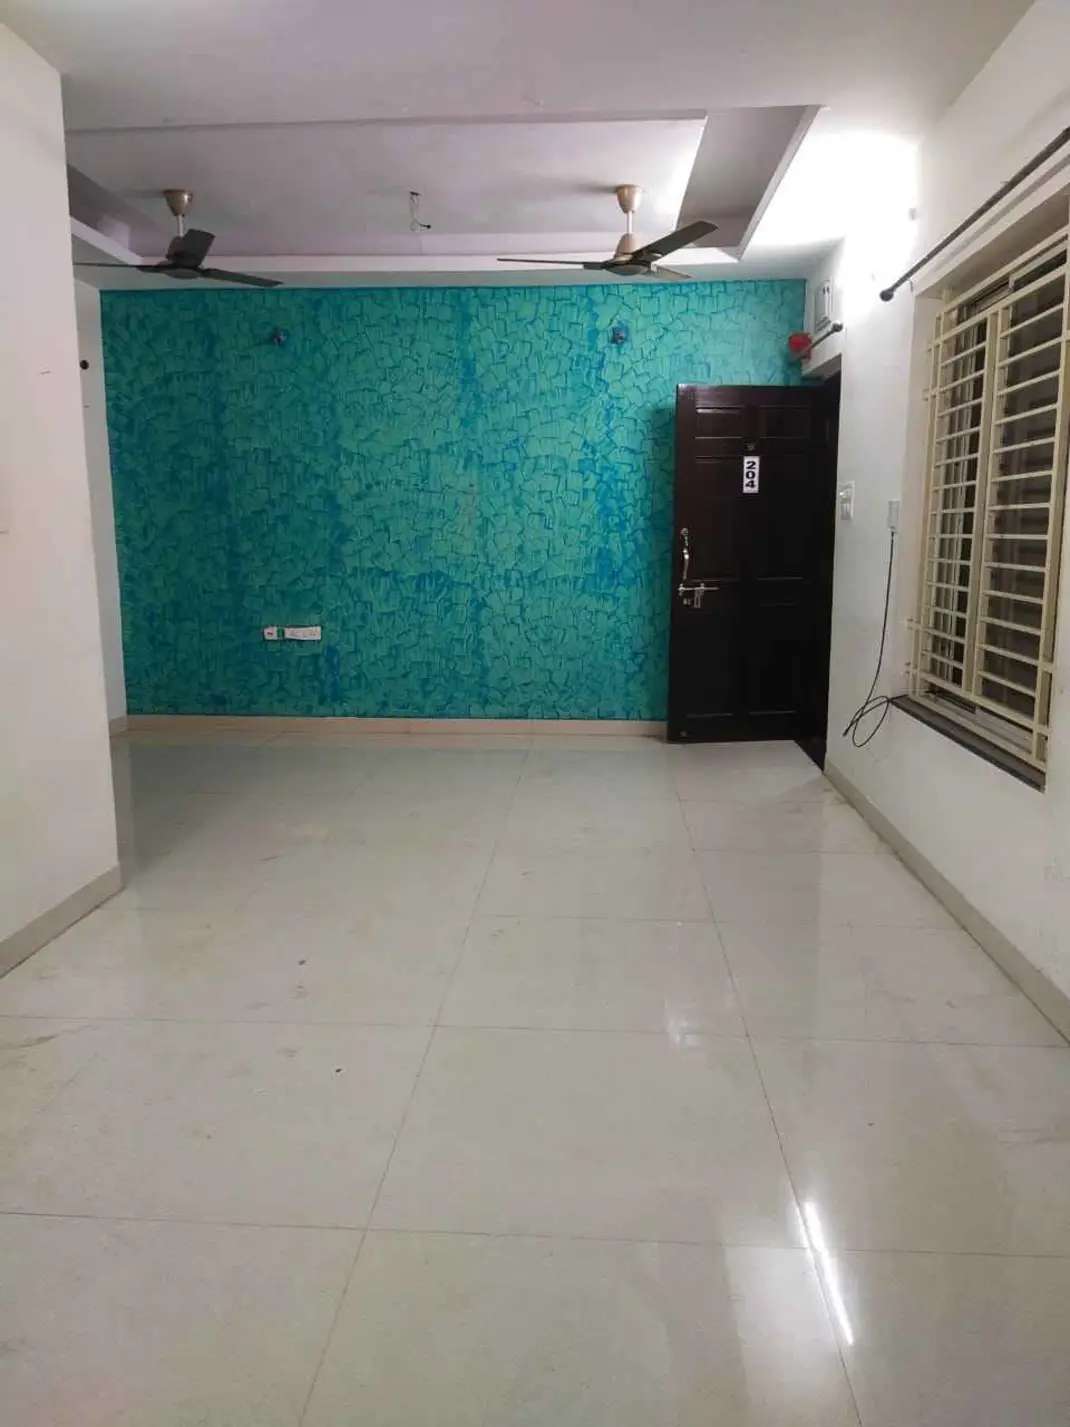 2 Bed/ 2 Bath Rent Apartment/ Flat, Semi Furnished for rent @Ganesh galaxi city ayodhya bypass road Bhopal 